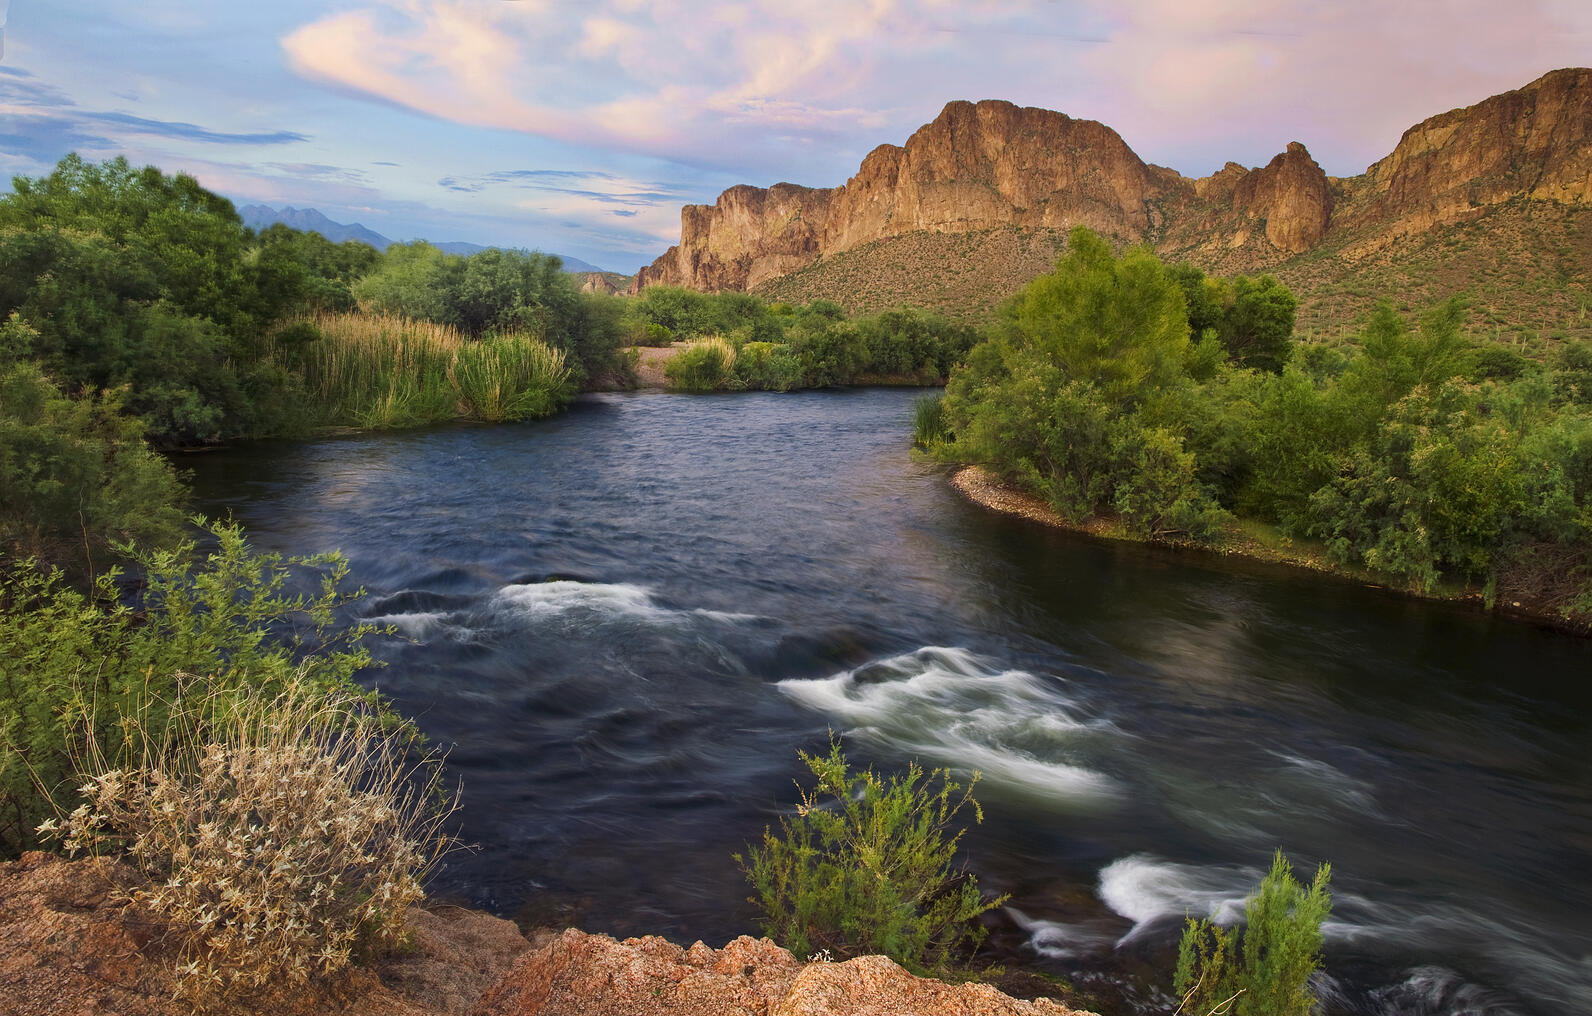 Lower Salt River Bend - the view looking uptream toward the lower Salt Rive...